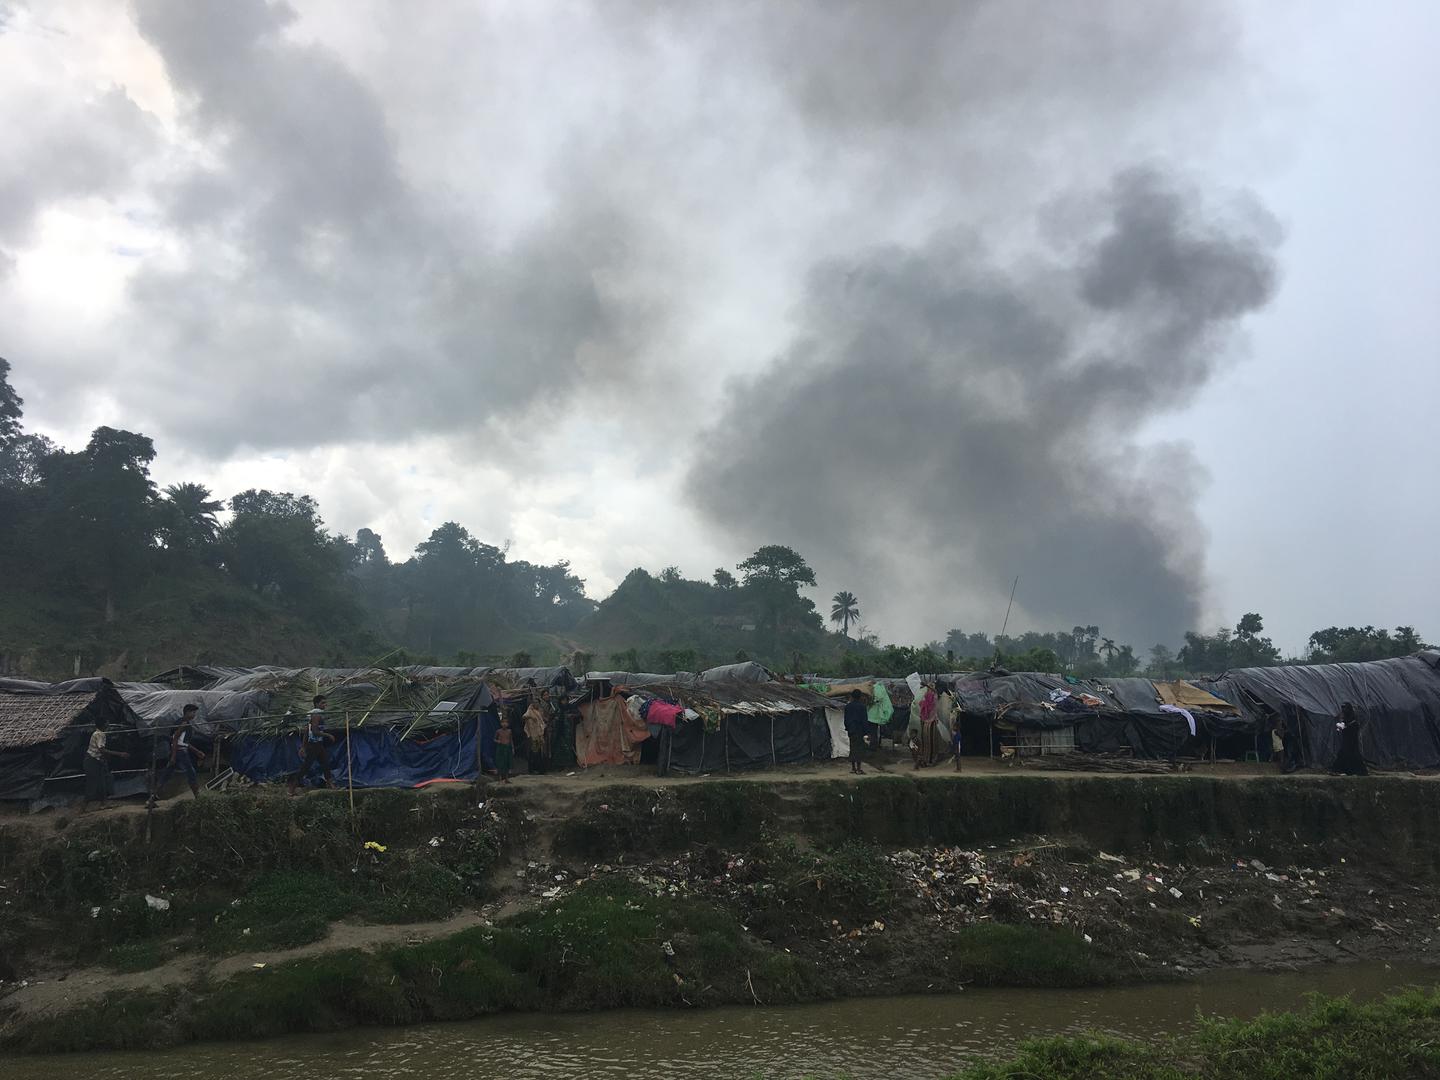 Smoke is seen rising from Burma’s Taung Pyo Let War village from across the border in Bangladesh.